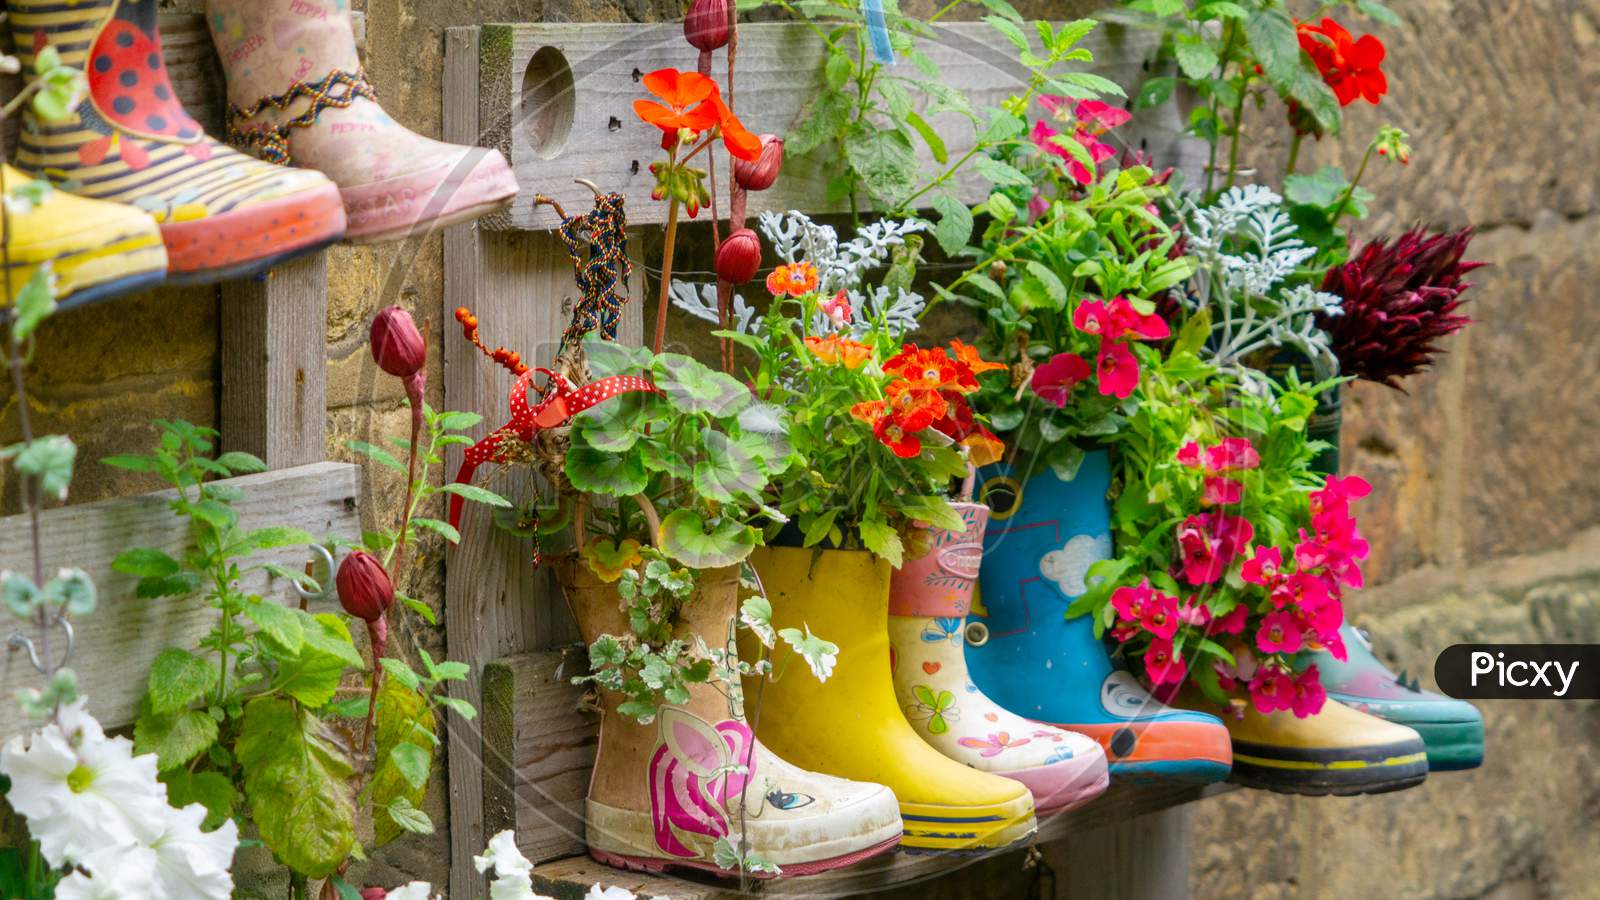 Rubber Wellington Boots Are Lined Up And Used As Flower Pots In The Coastal Village Of Staithes, North Yorkshire, Uk